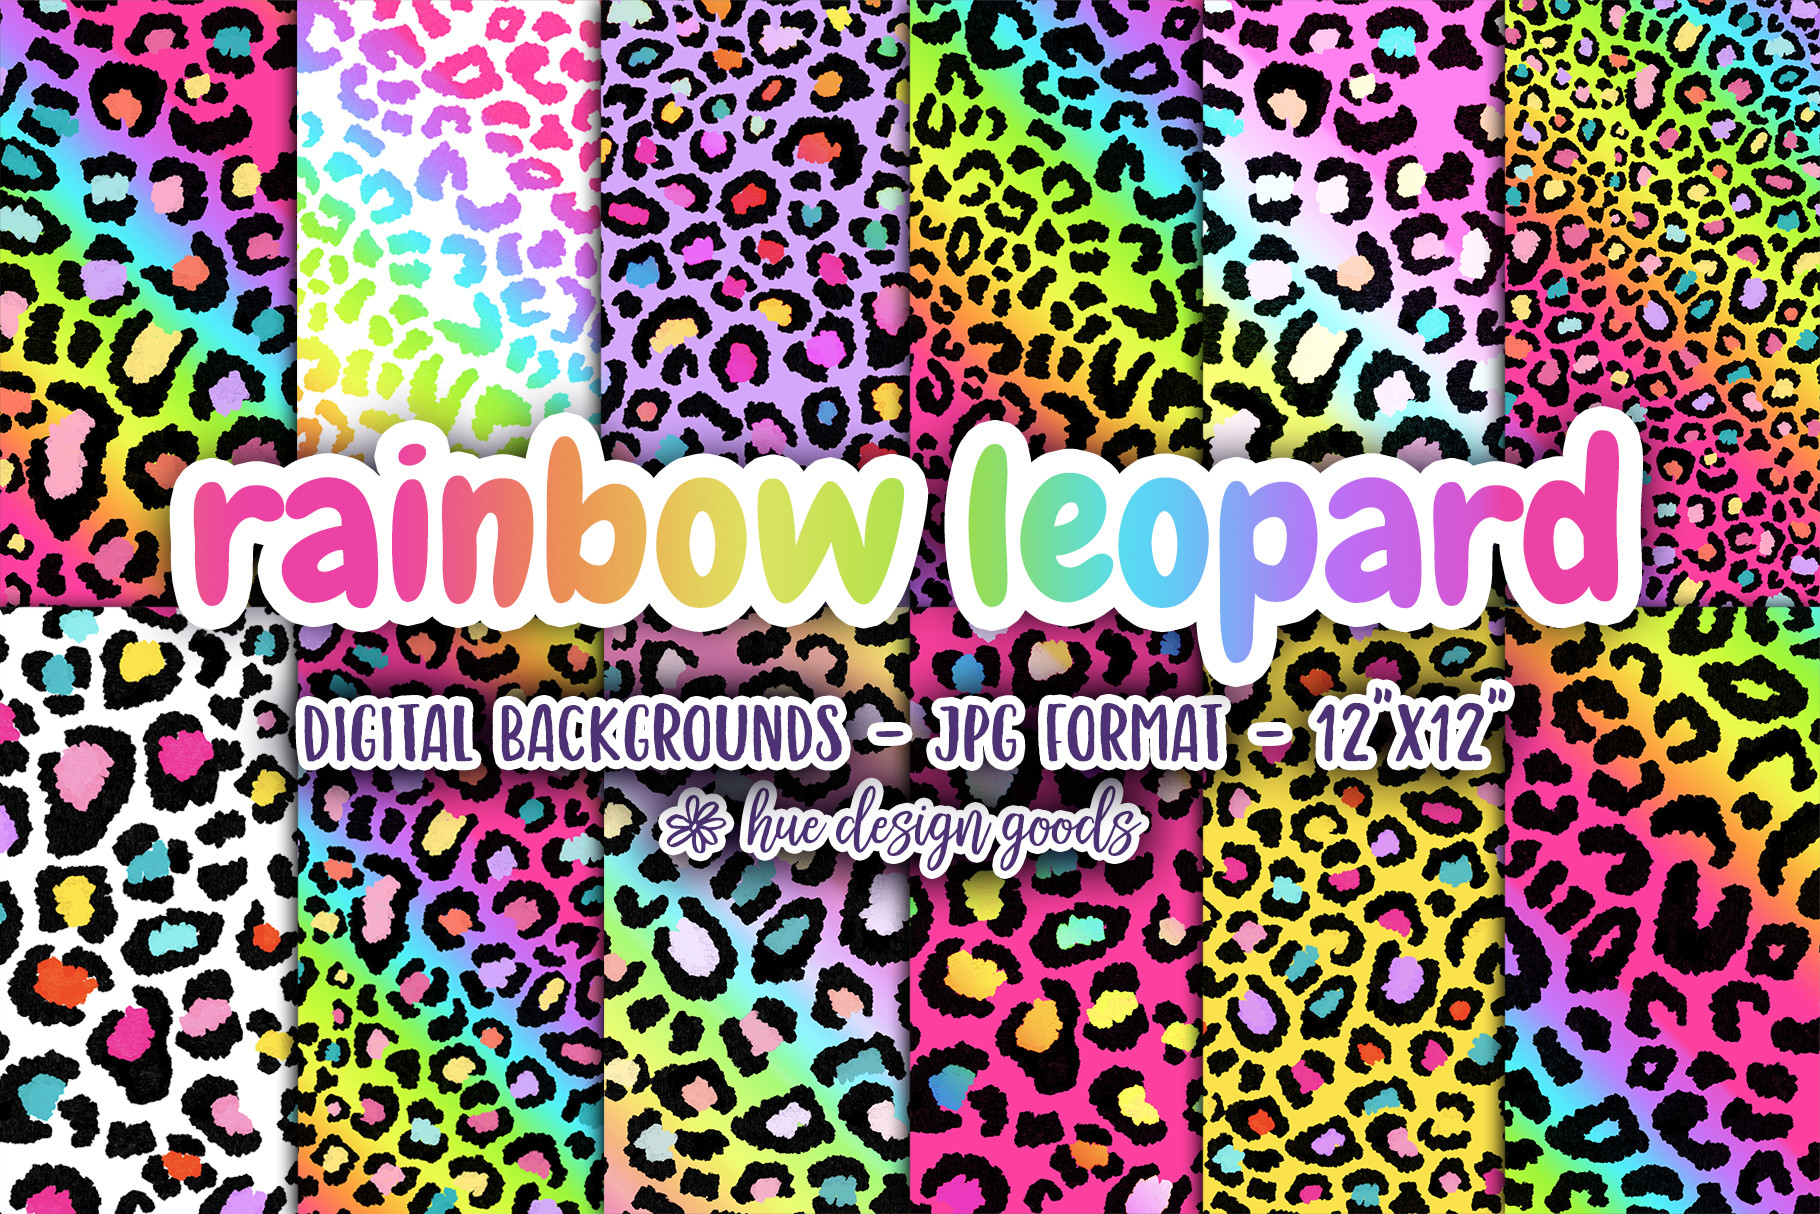 Rainbow Leopard Pattern Backgrounds Graphic by huedesigngoods